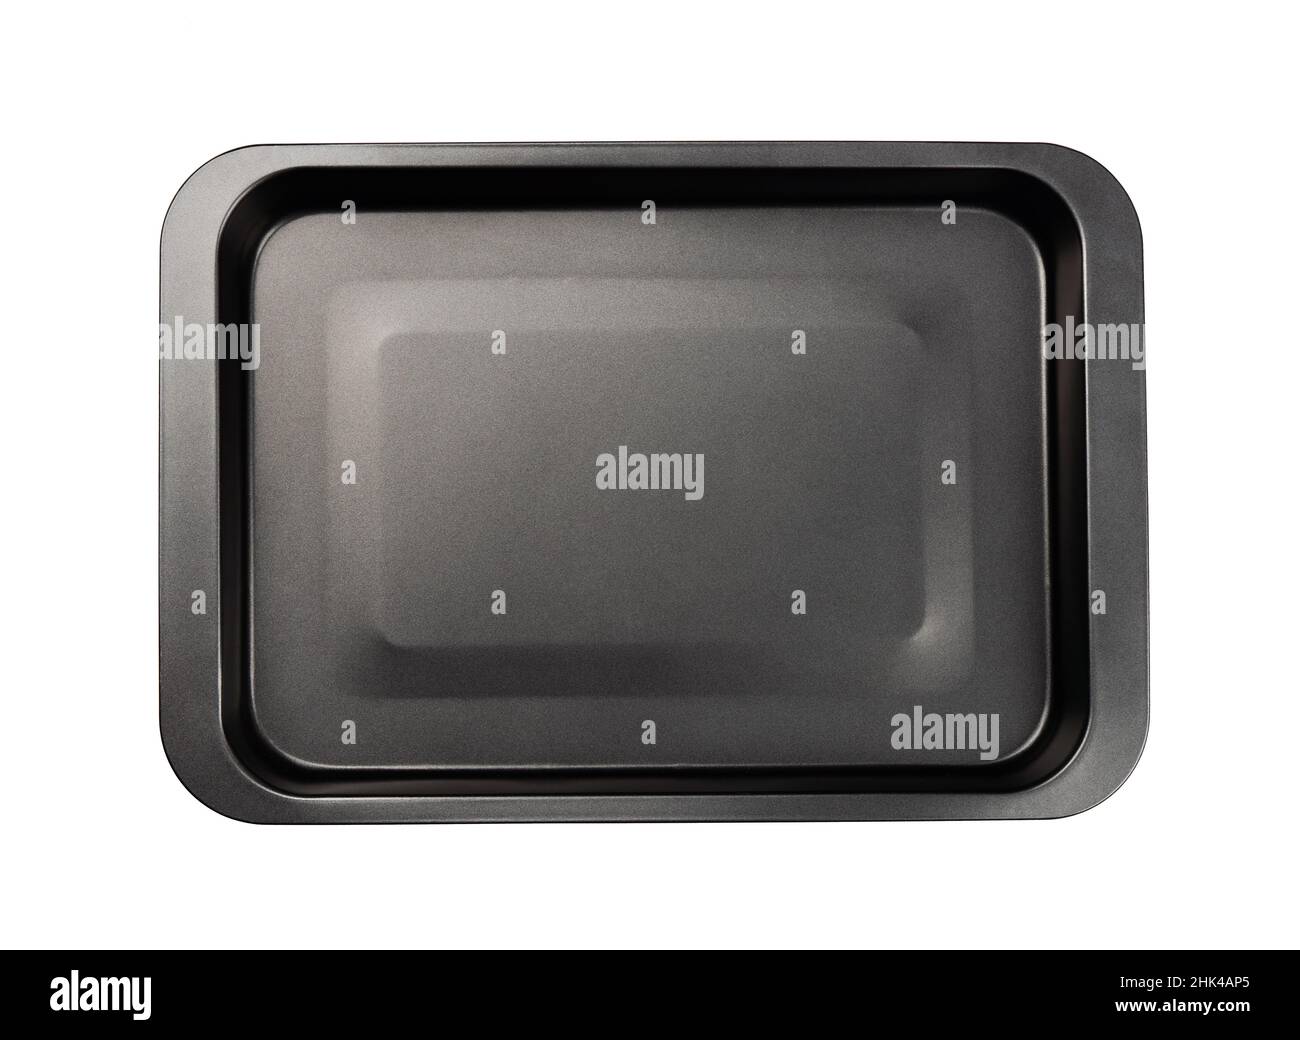 https://c8.alamy.com/comp/2HK4AP5/top-view-of-new-empty-black-non-stick-metal-baking-tray-isolated-on-white-2HK4AP5.jpg